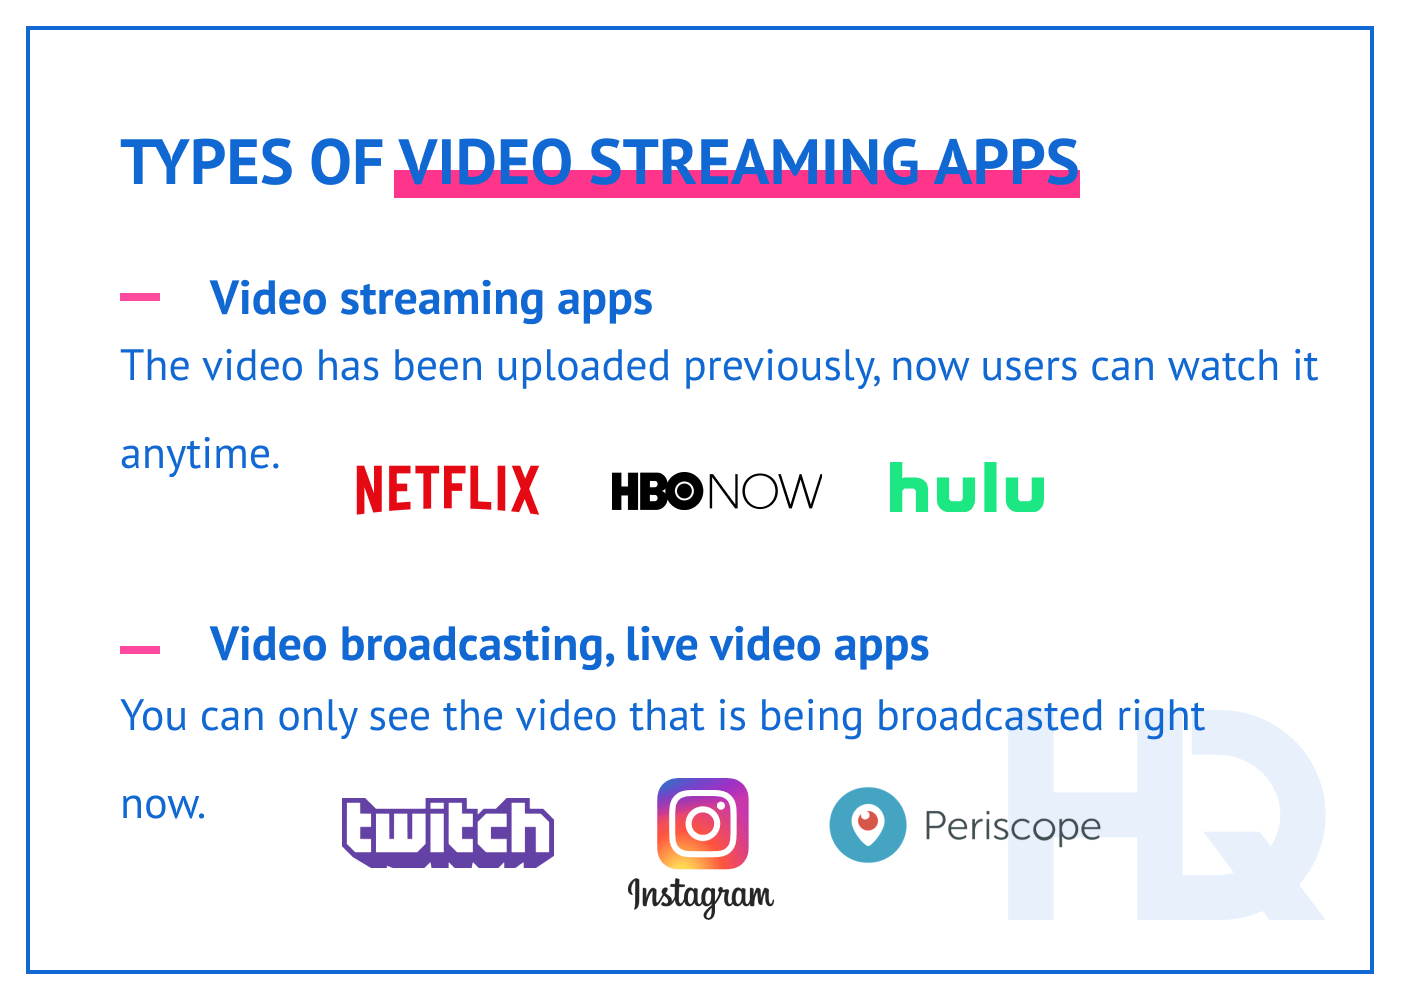 Types of video streaming apps.